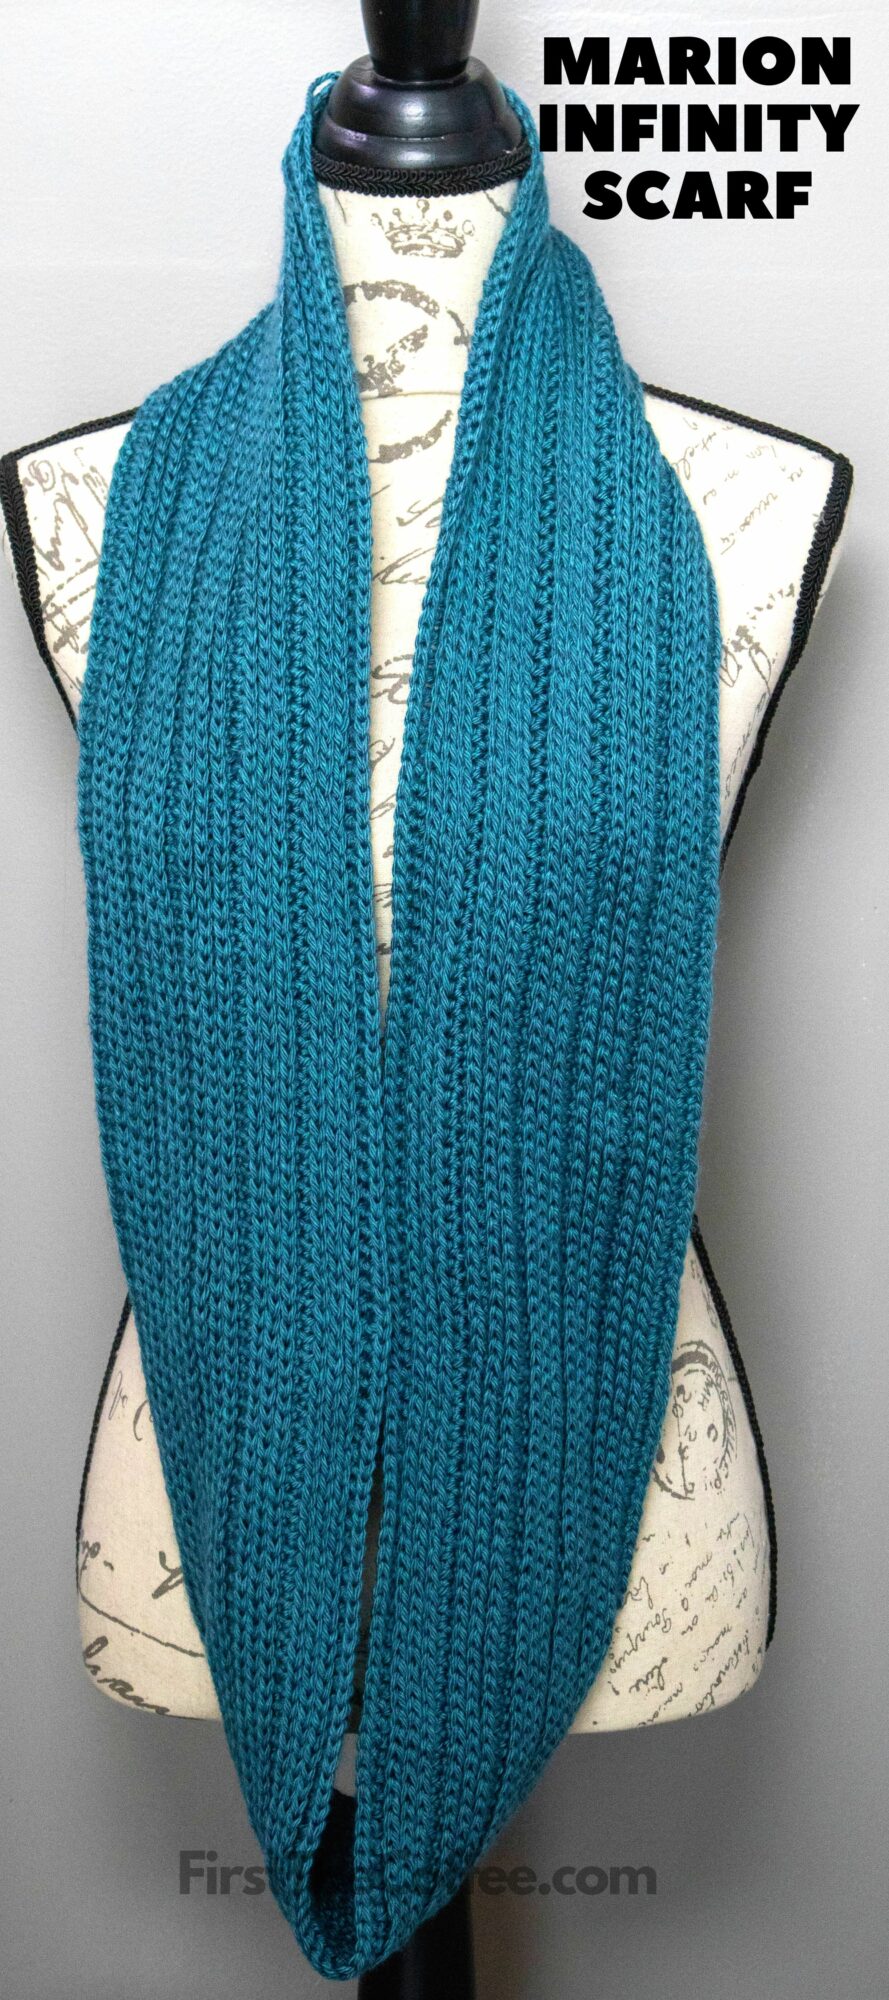 Marion Crochet Infinity Scarf Unraveled